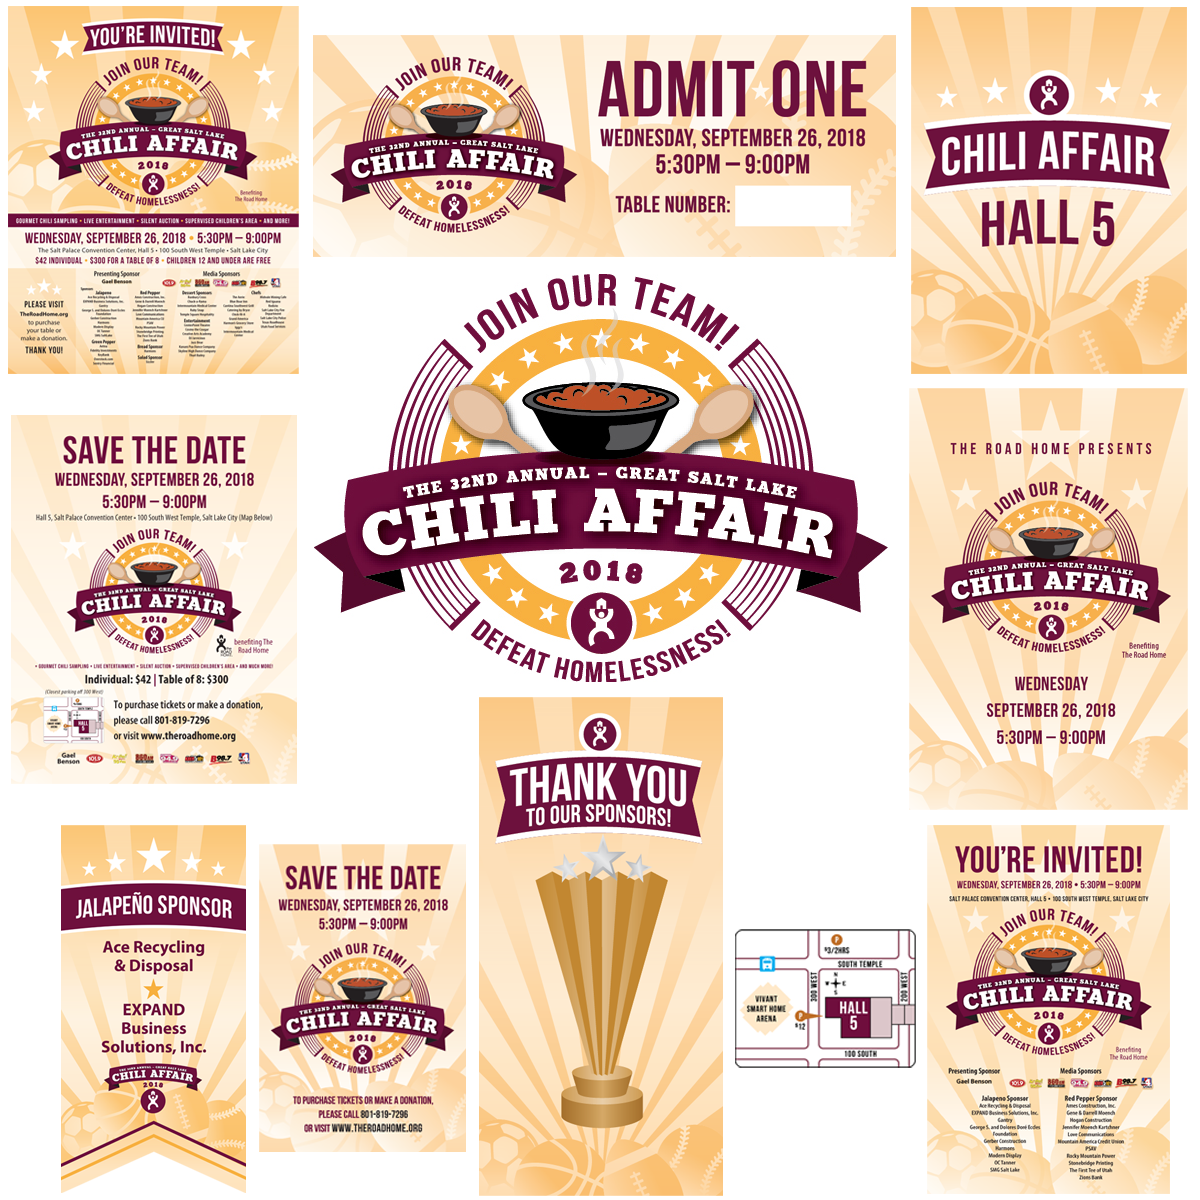 The Road Home Chili Affair Creative Collateral Designed by EXPAND